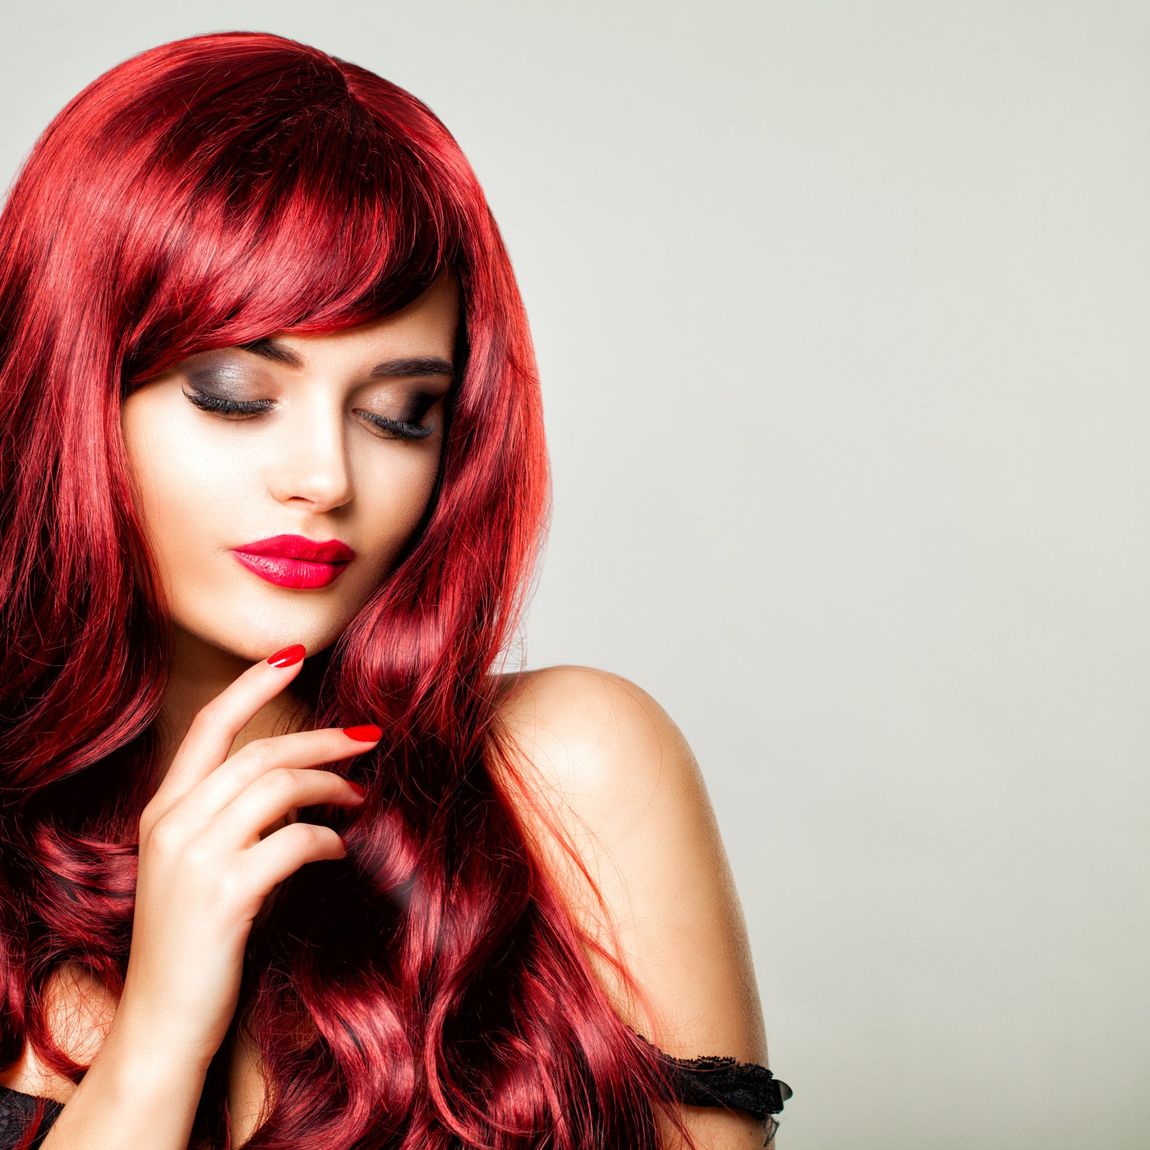 Glamorous Redhead Woman with Perfect Hairstyle and Makeup. Beautiful Model with Long Red Healthy Hair